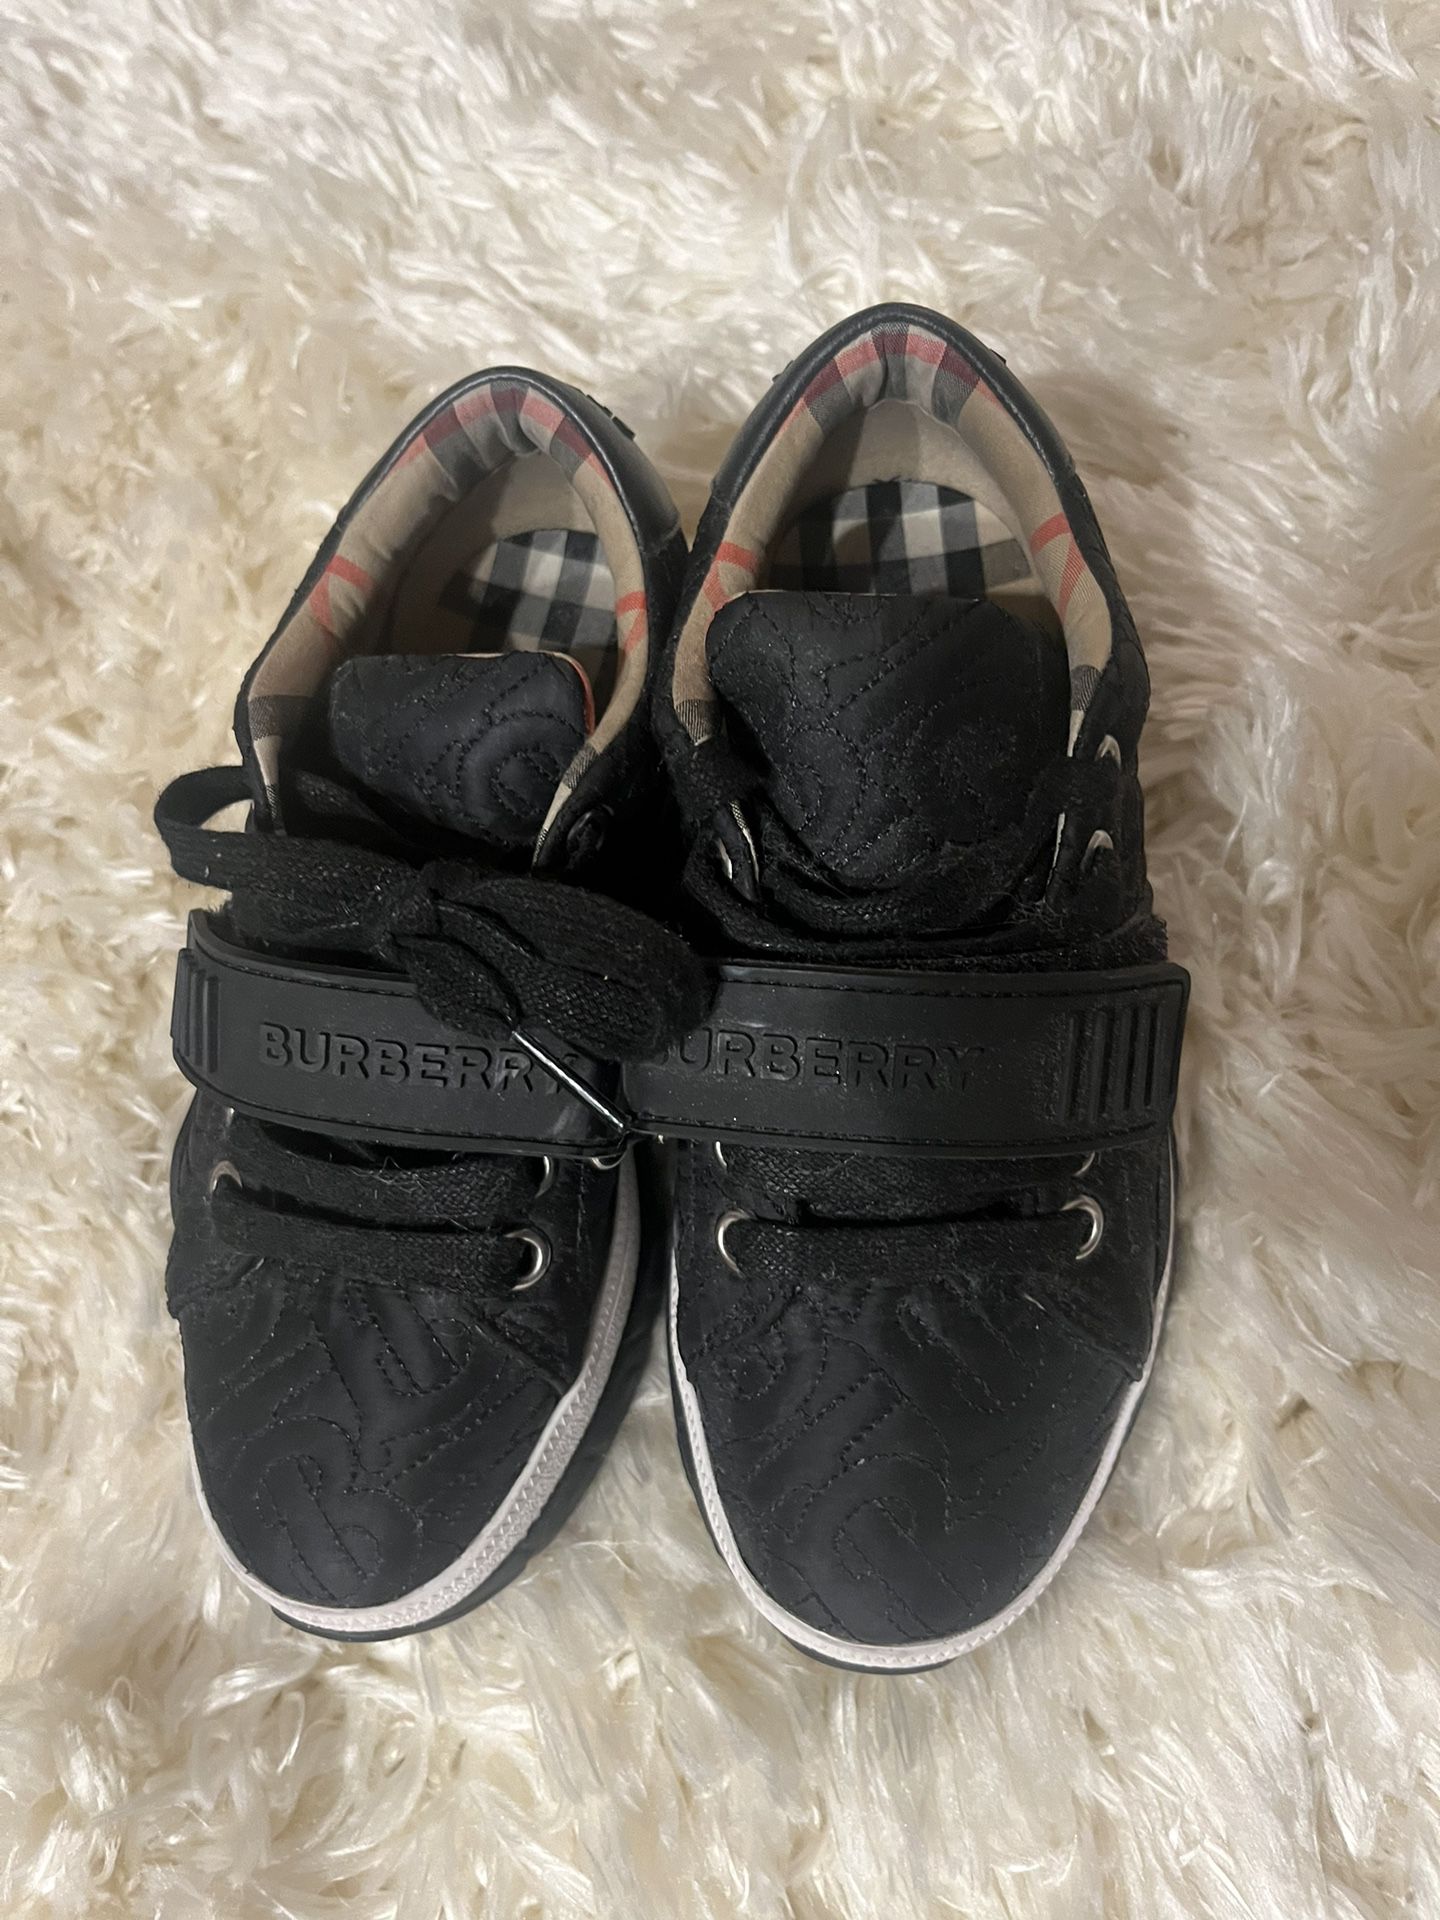 Toddler Boys Burberry Shoes In Size 30